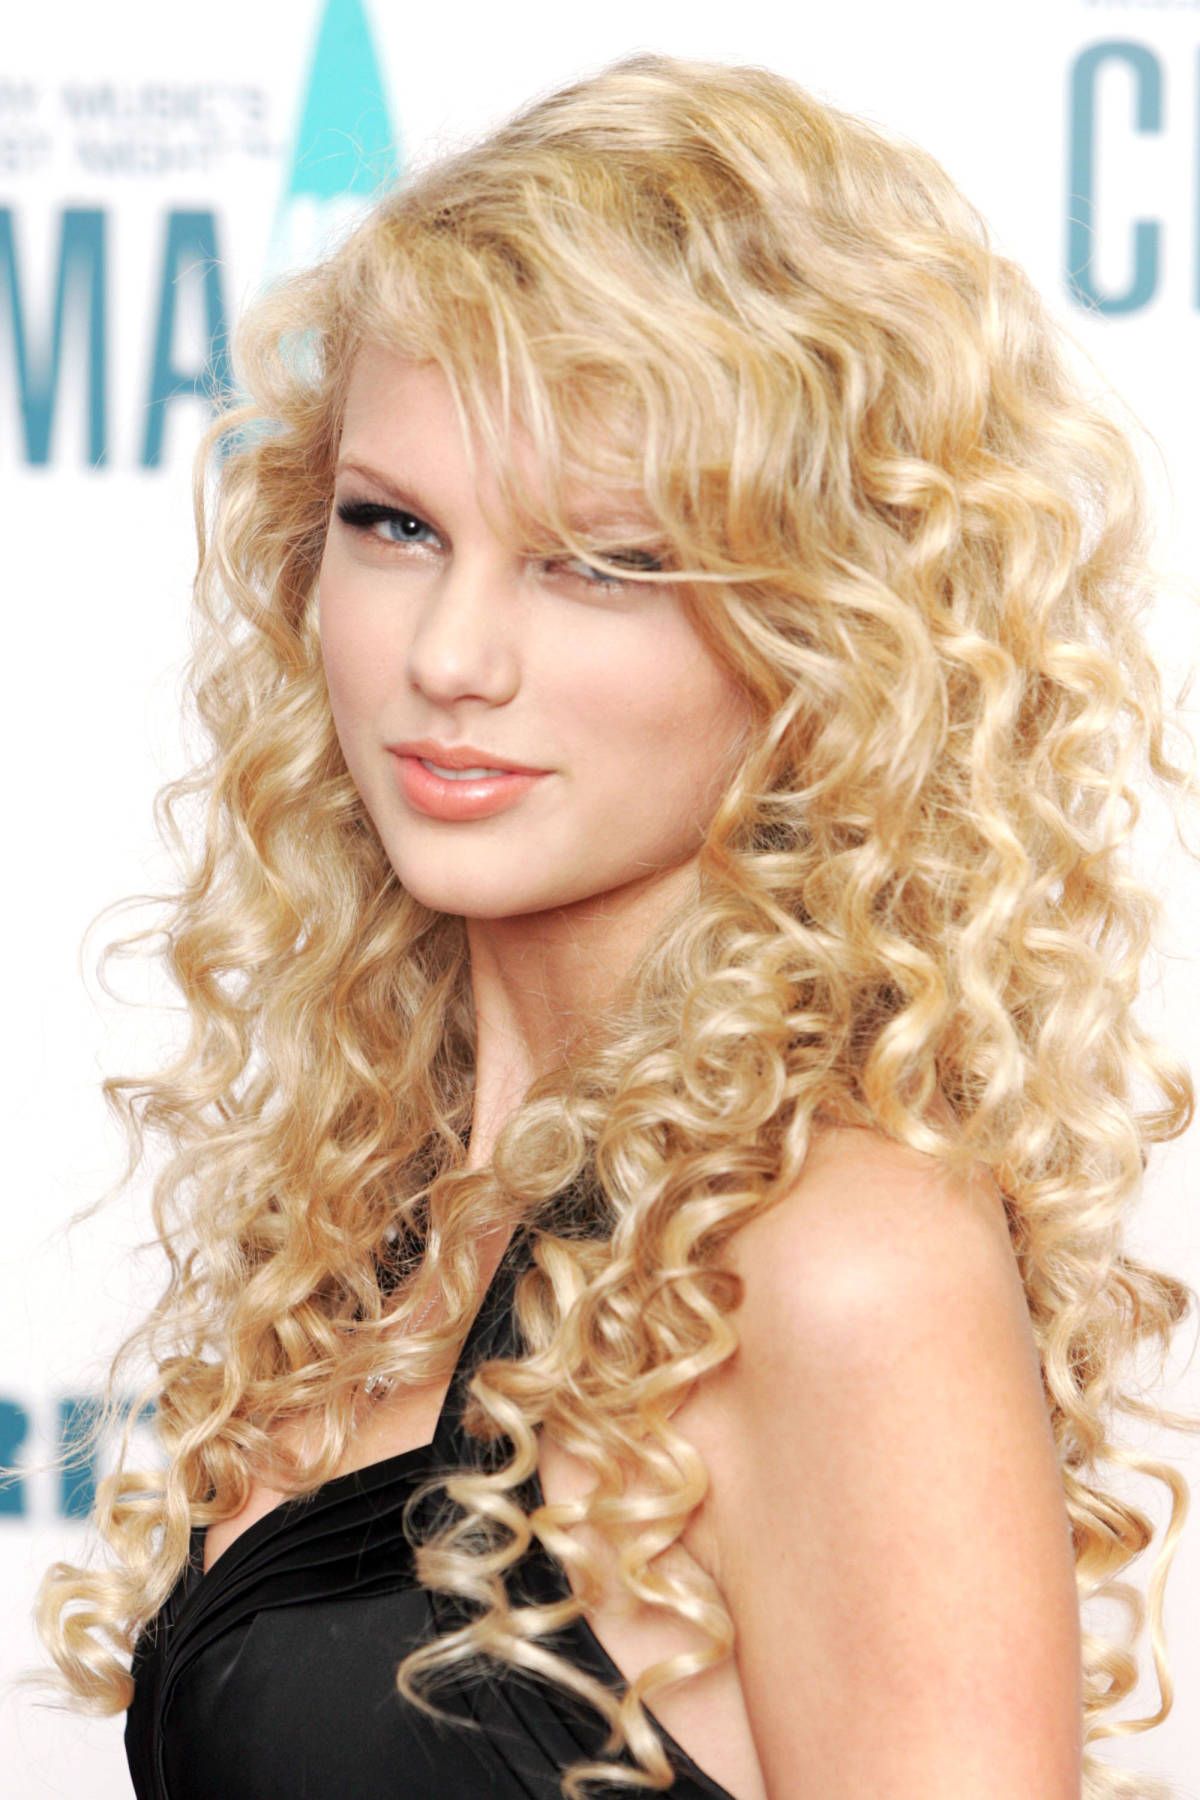 taylor swift hairstyles taylor swift s curly straight short long hair taylor swift hairstyles taylor swift